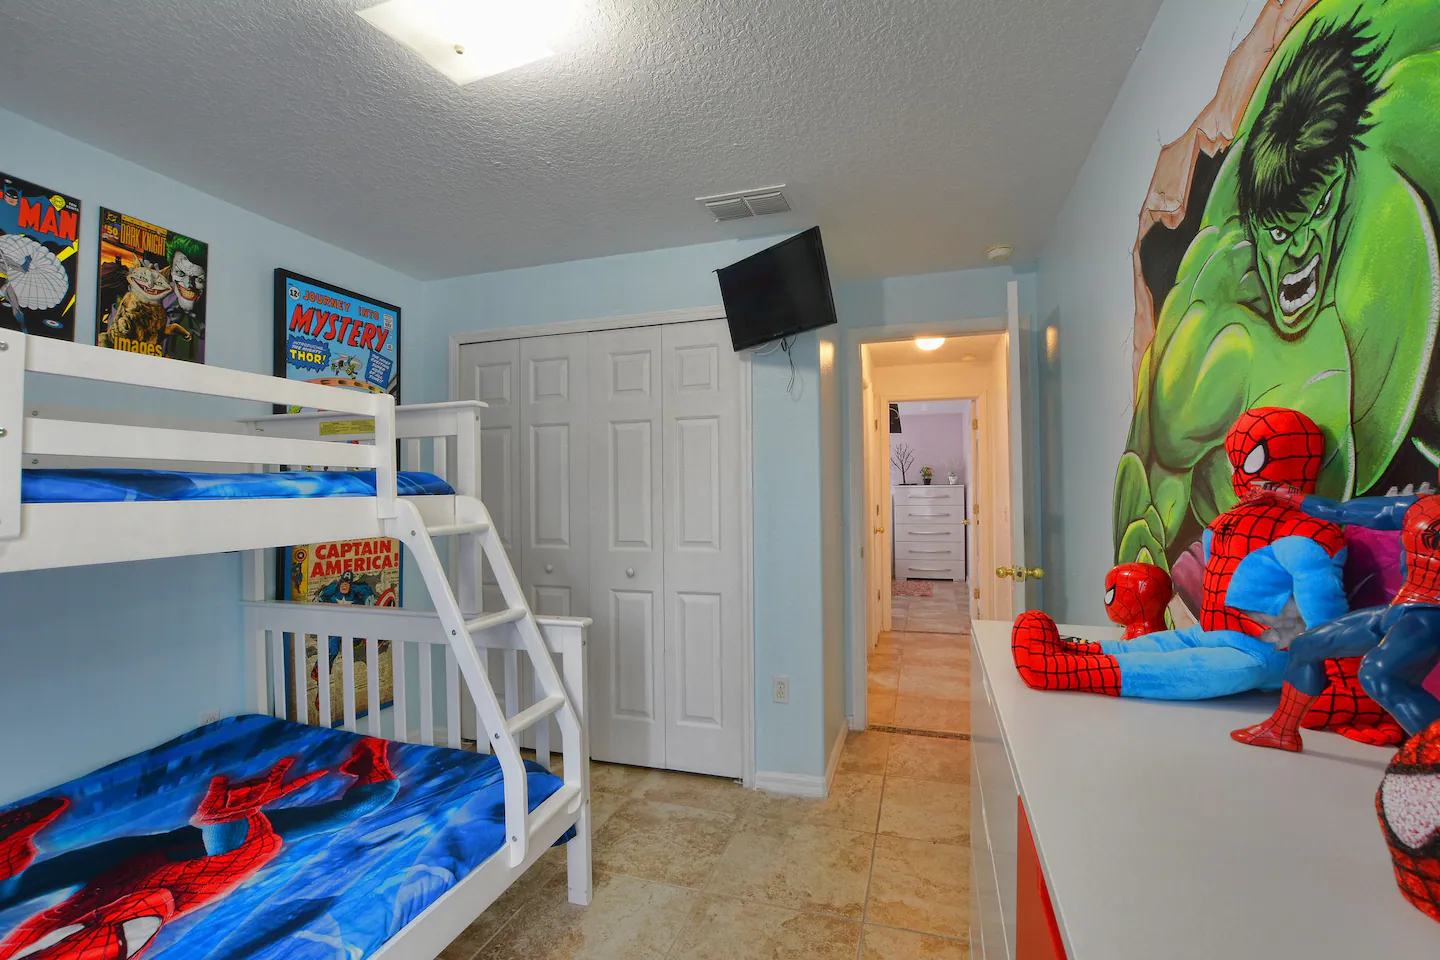 Marvel-themed bedroom with bunk beds